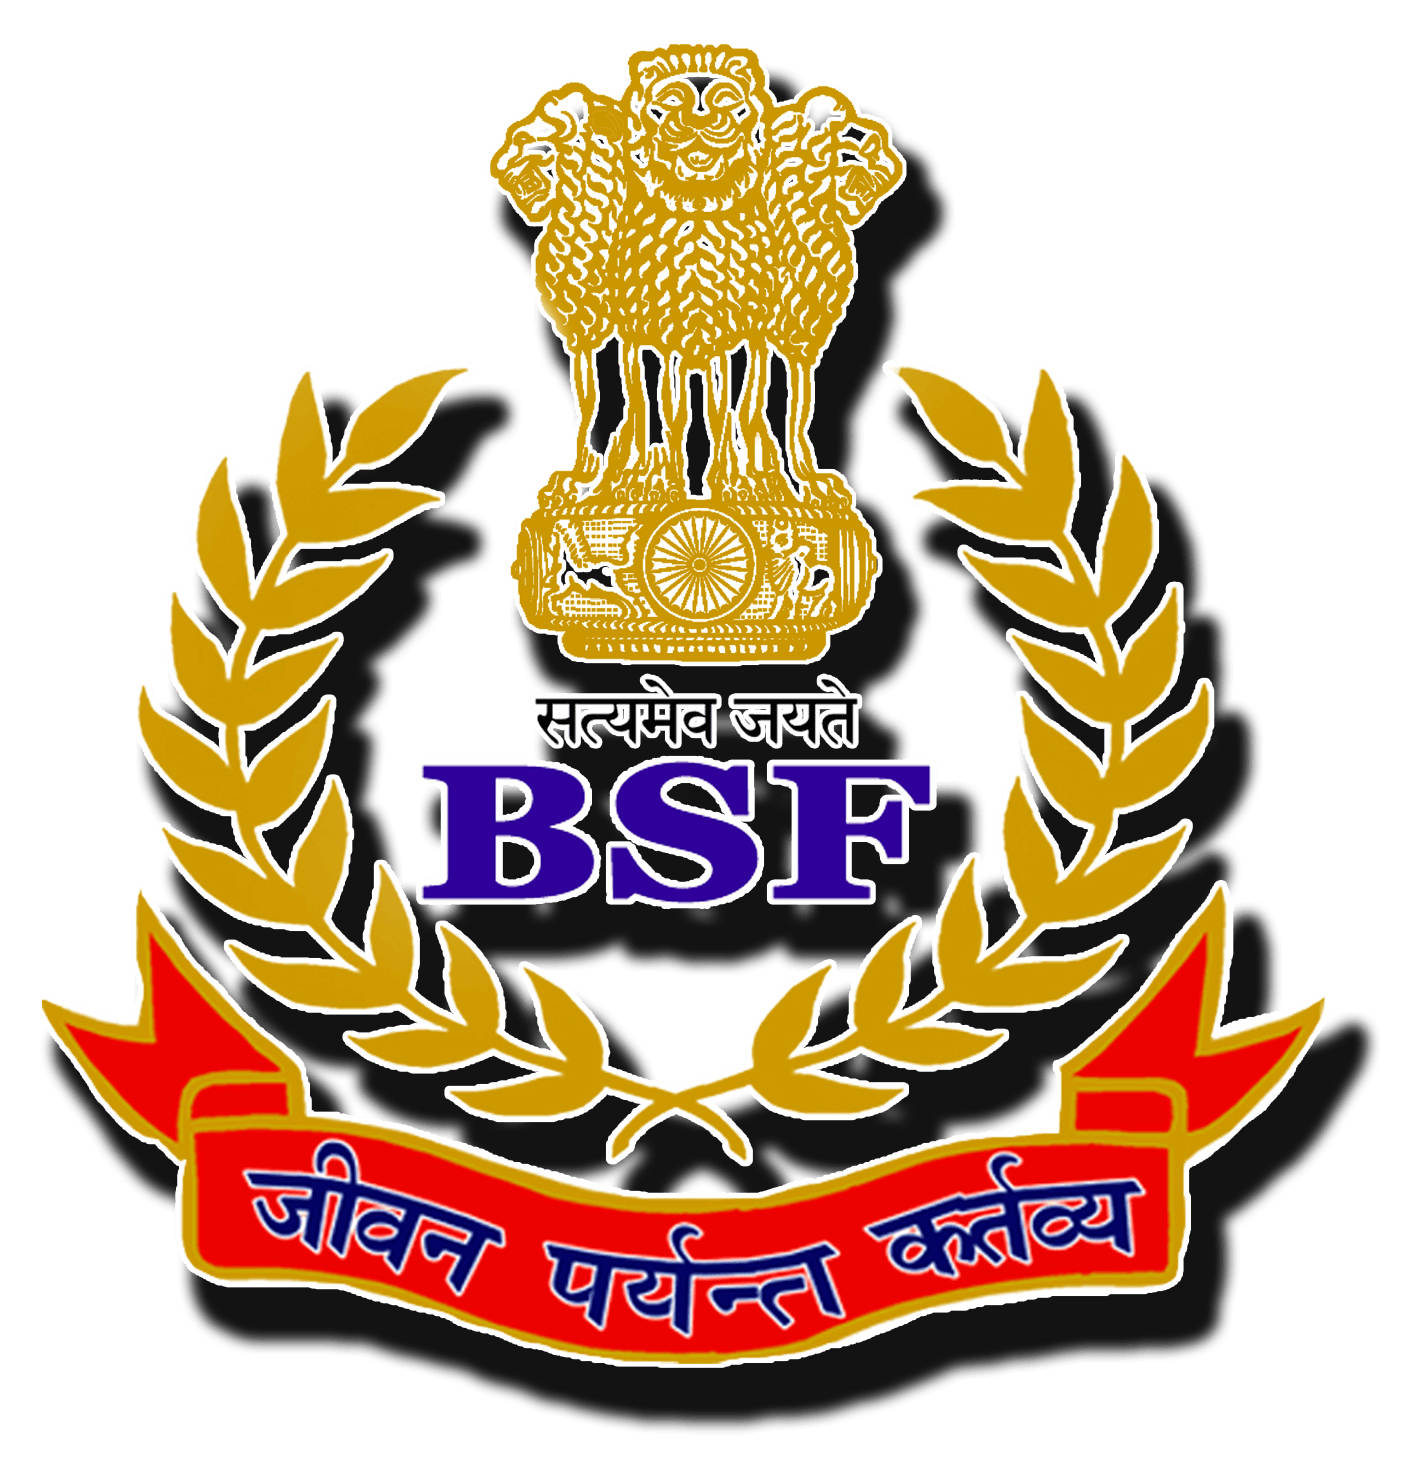 BSF Logo - Bsf image free download